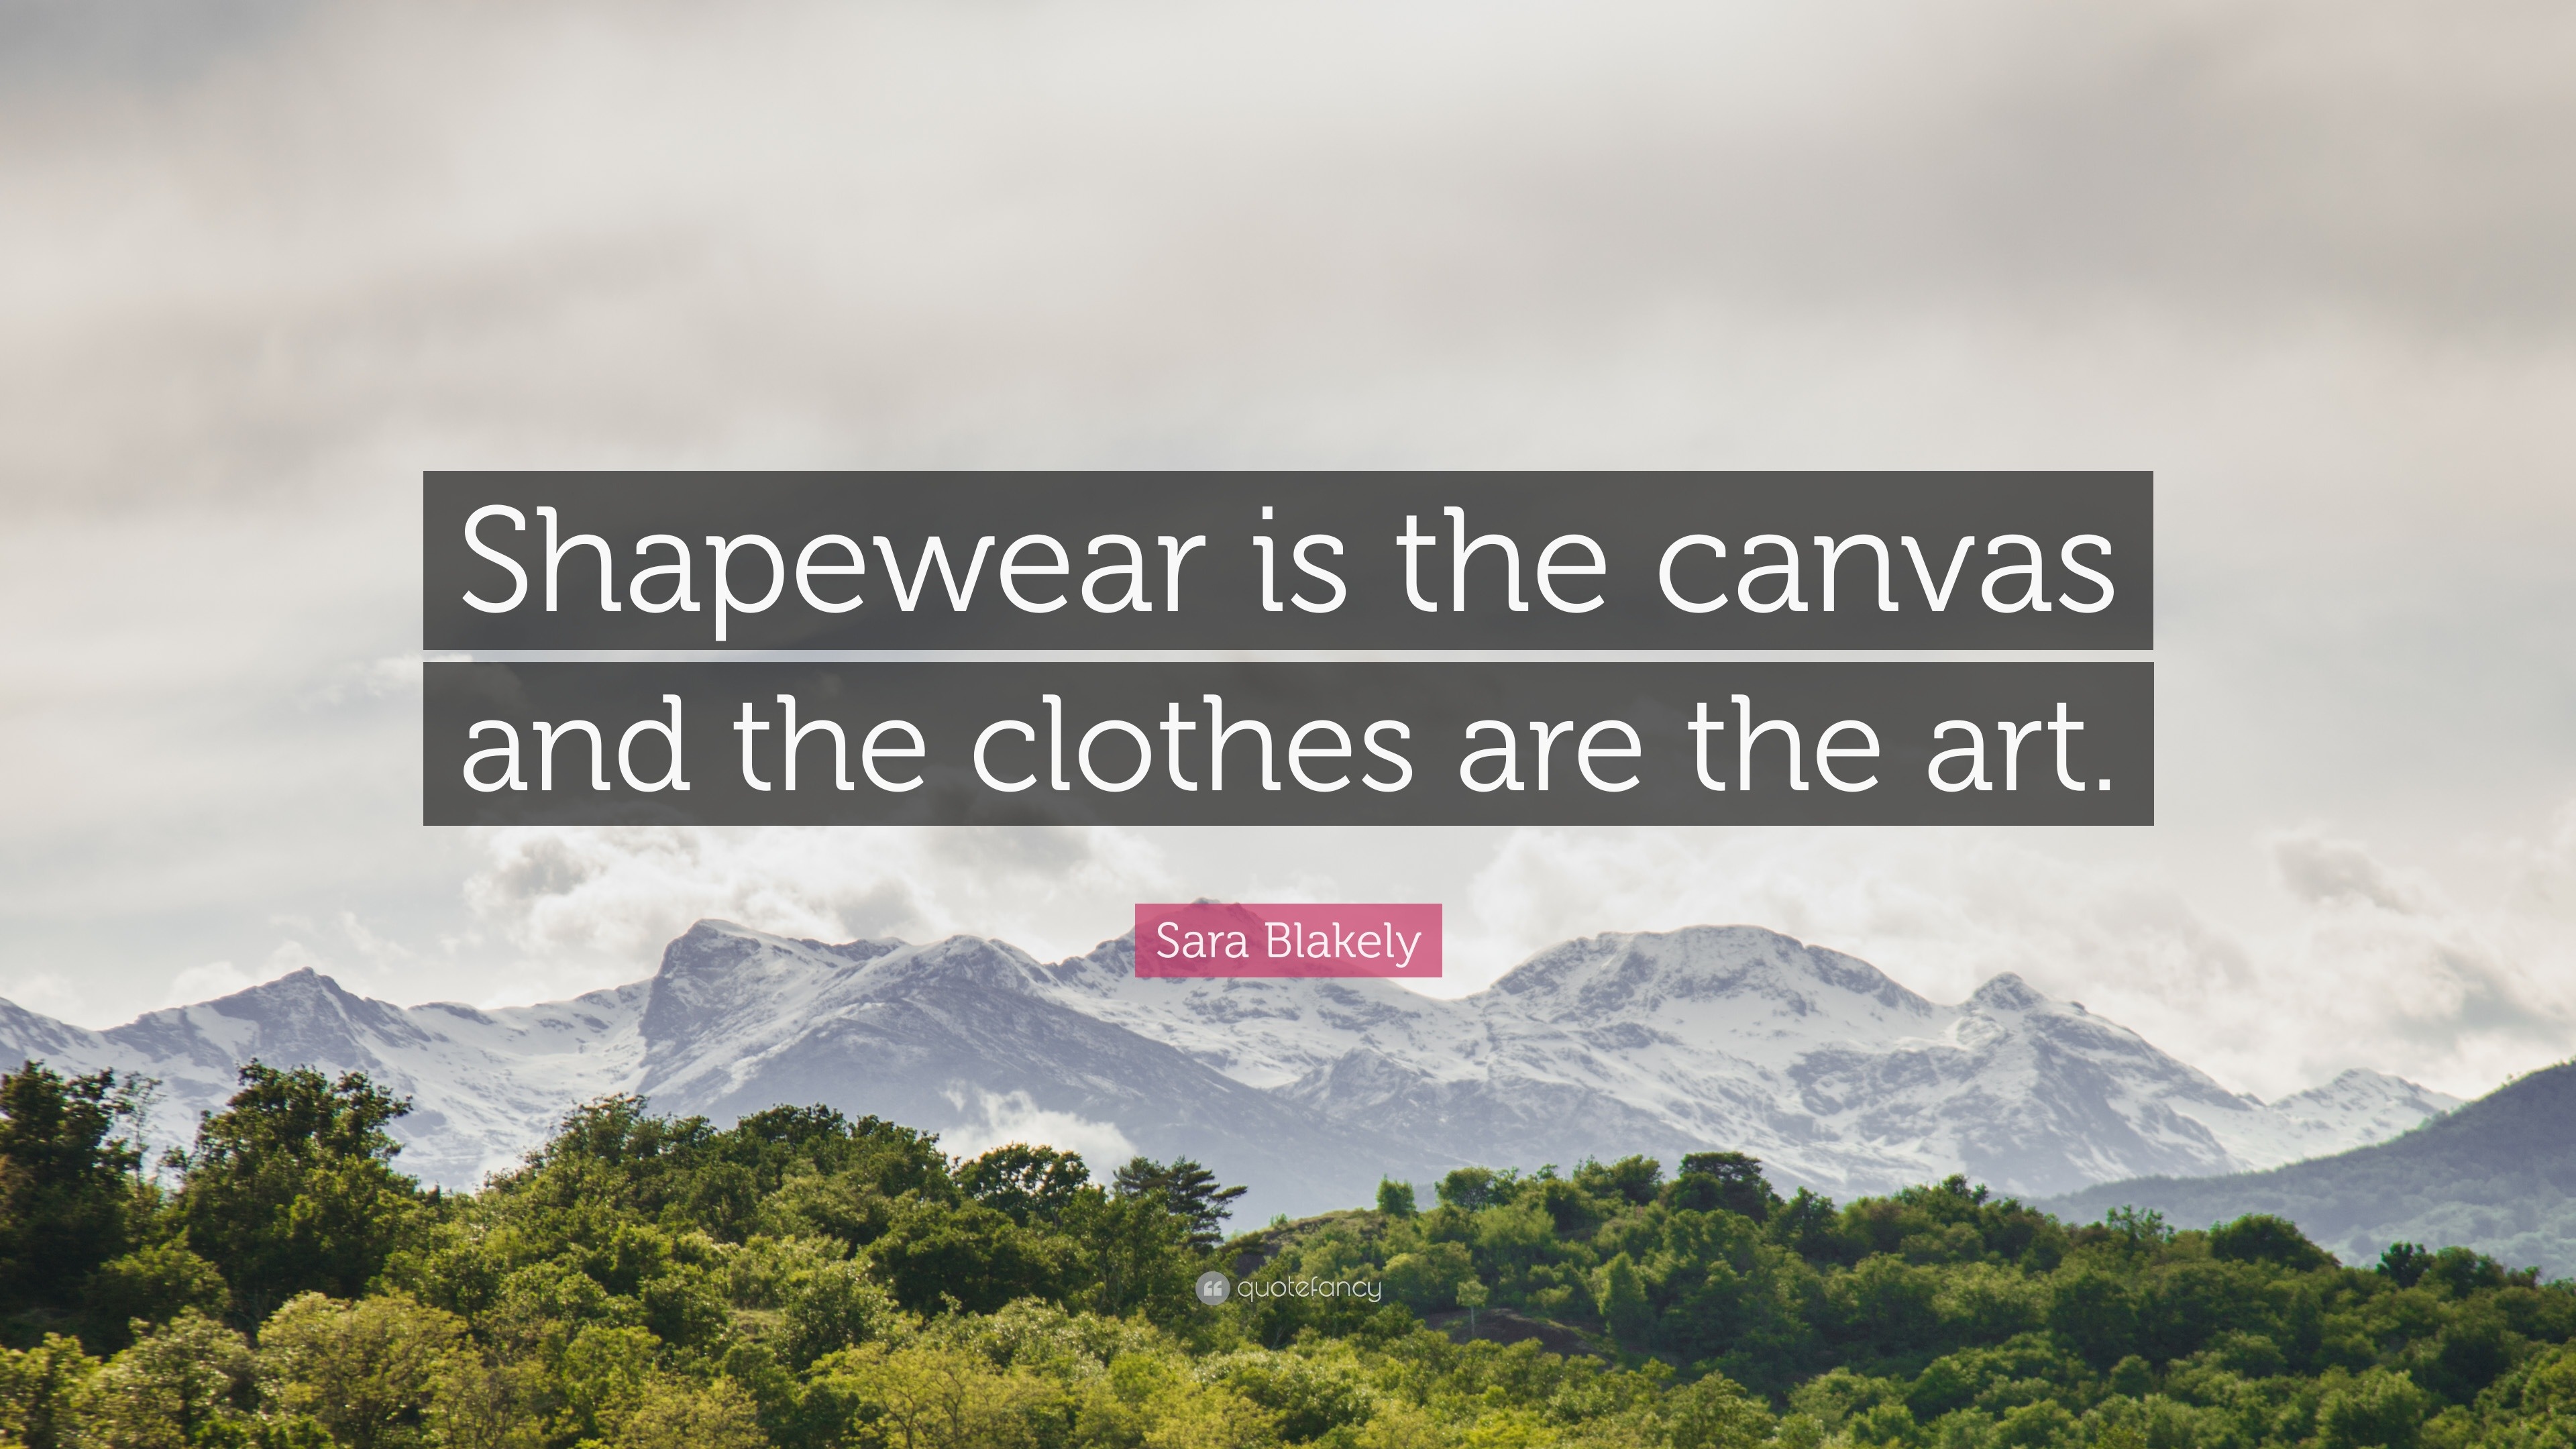 https://quotefancy.com/media/wallpaper/3840x2160/1980952-Sara-Blakely-Quote-Shapewear-is-the-canvas-and-the-clothes-are-the.jpg